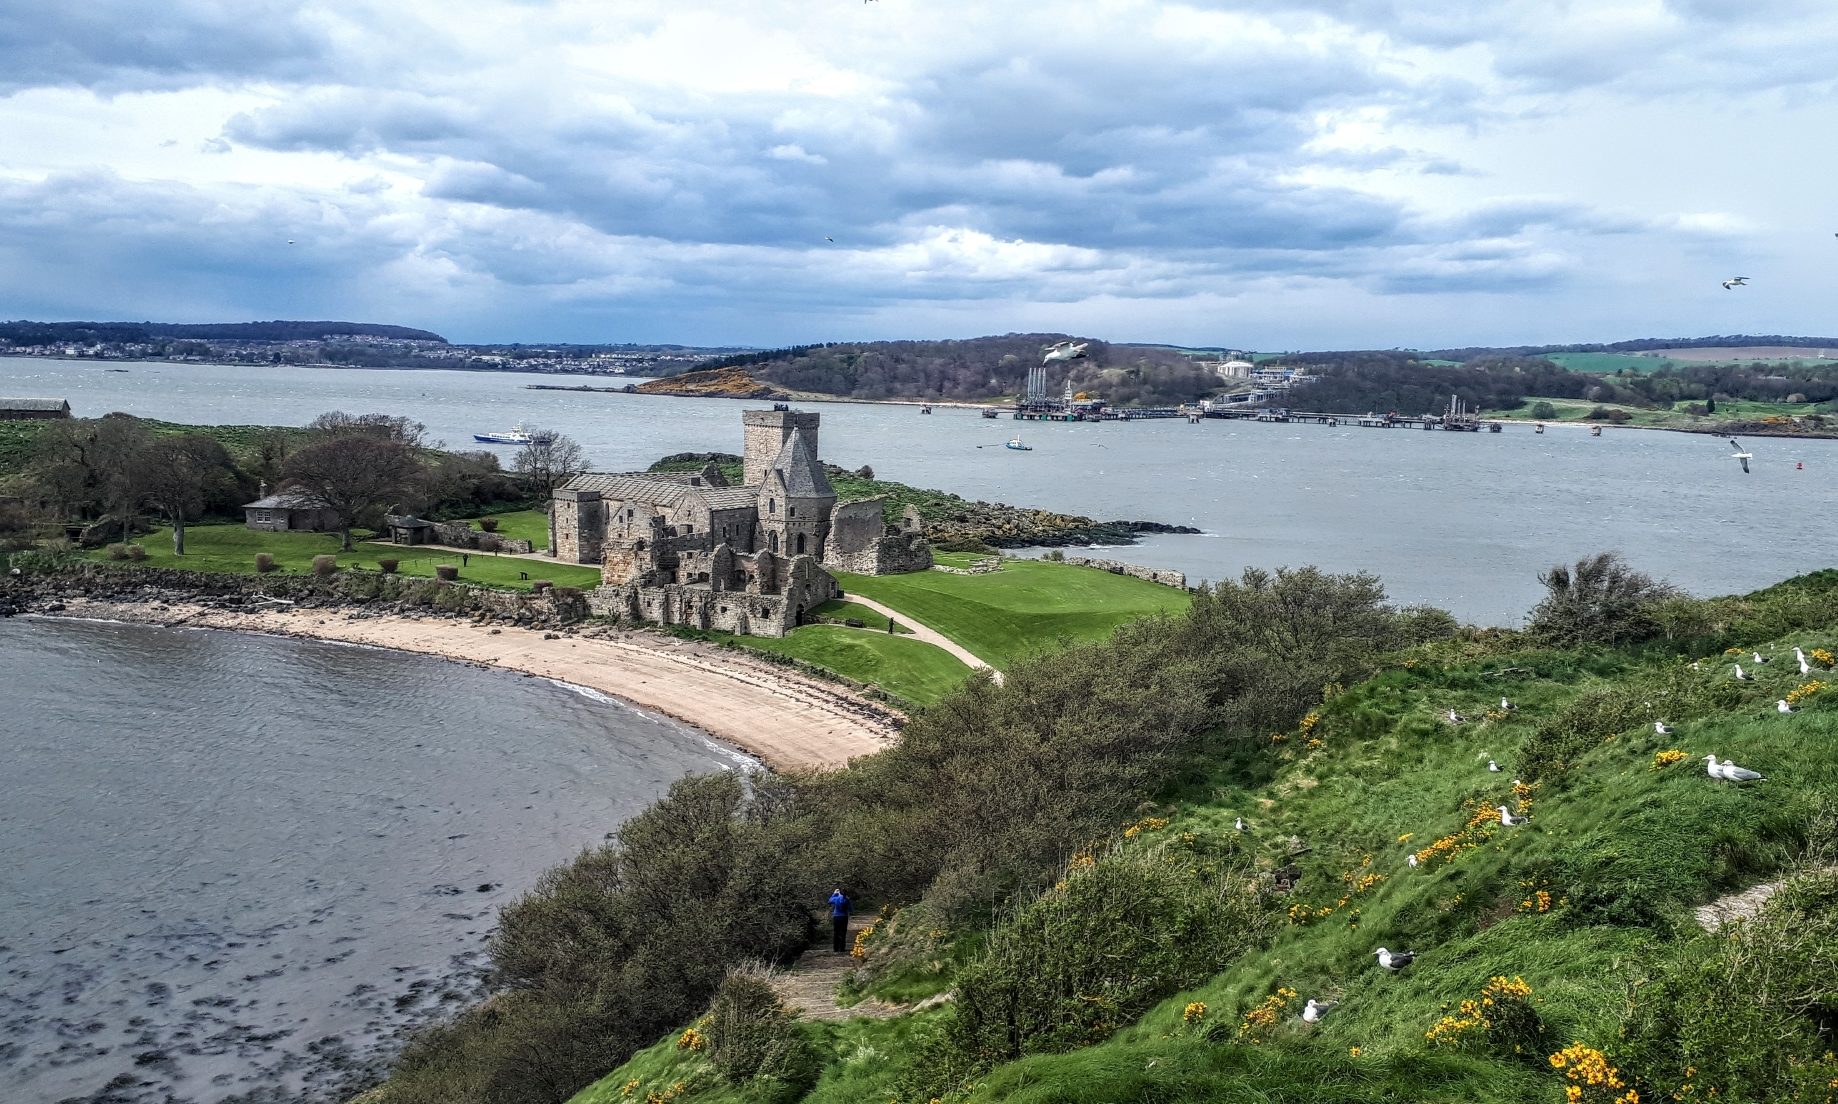 Stunning Inchcolm Island is easily reached with a Maid of the Forth boat trip.